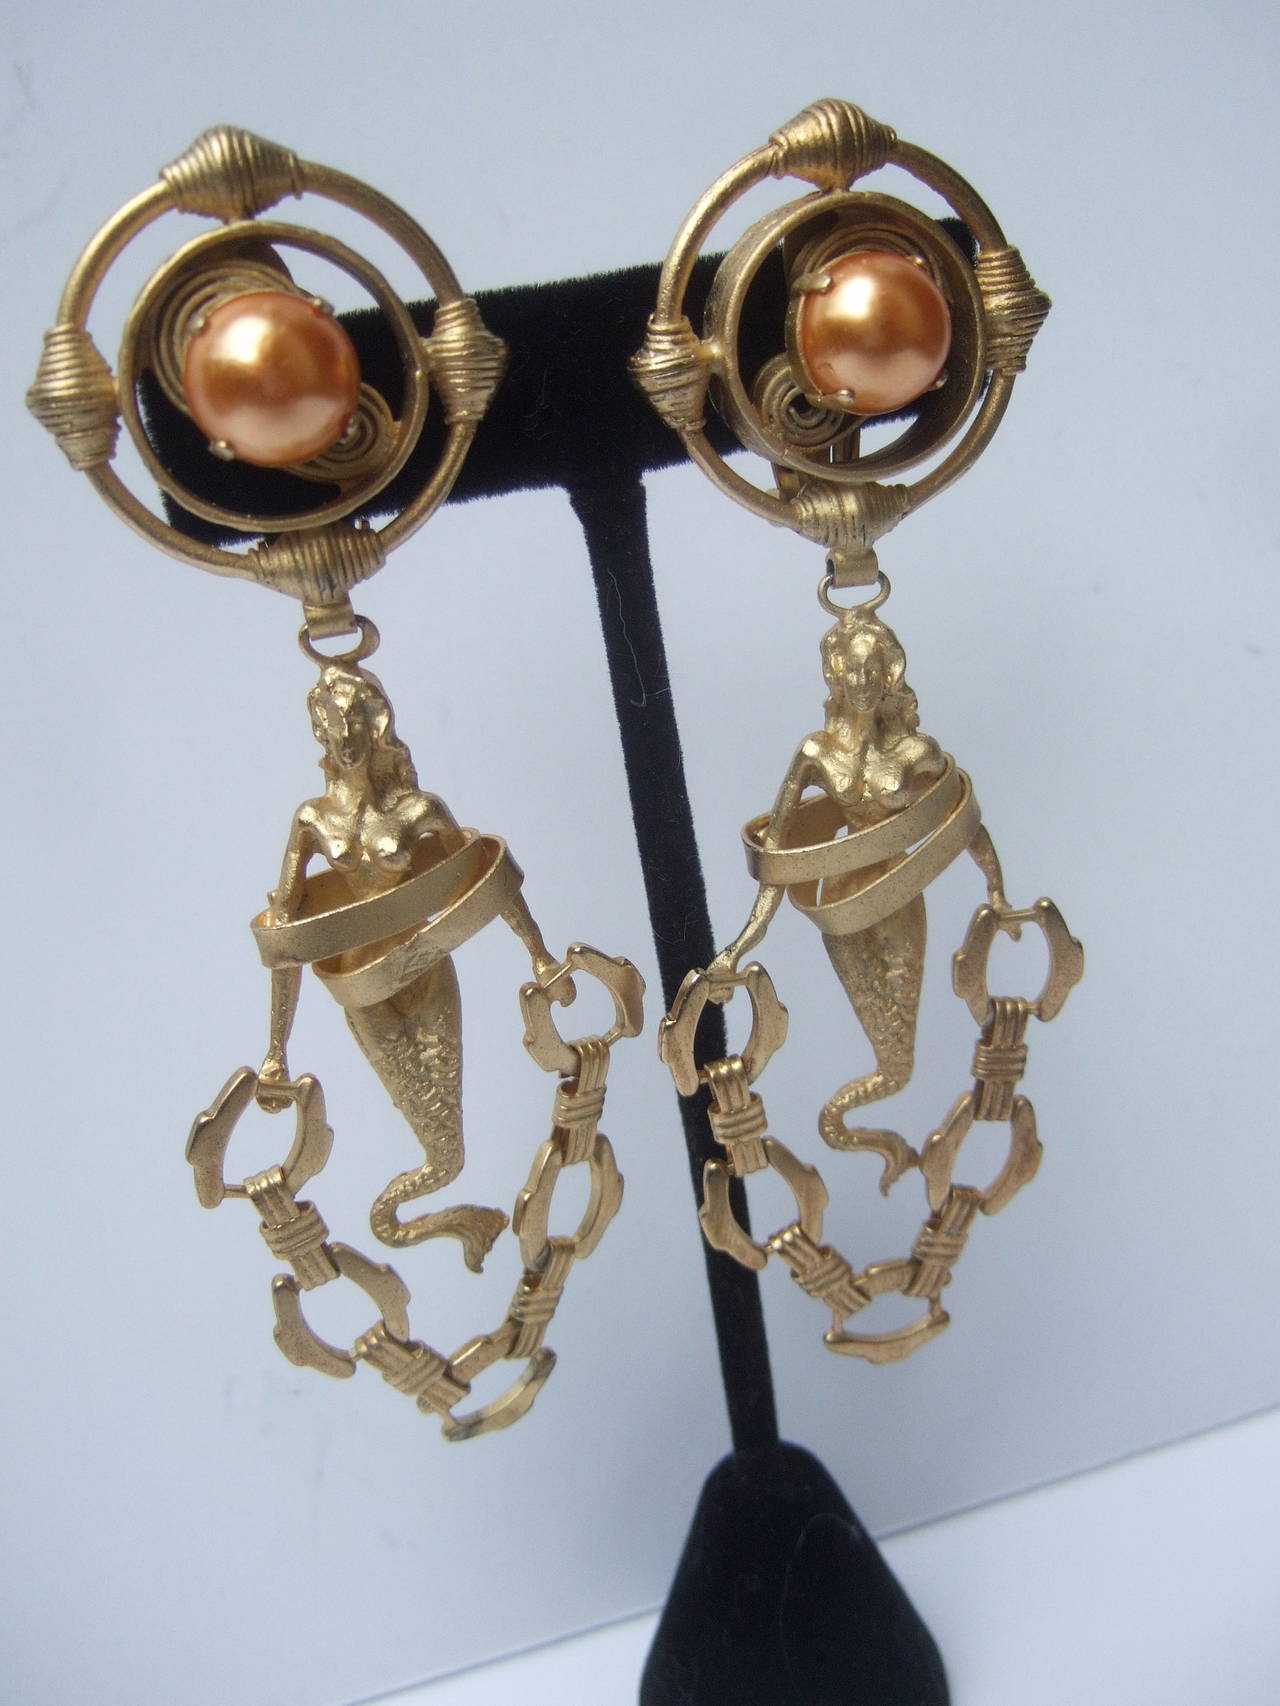 Italian artisan handmade gilt metal mermaid statement earrings designed by Particolari. The chic designer earrings are constructed with matte gilt metal
The huge runway style earrings are designed with figural mermaids with bands of gilt metal